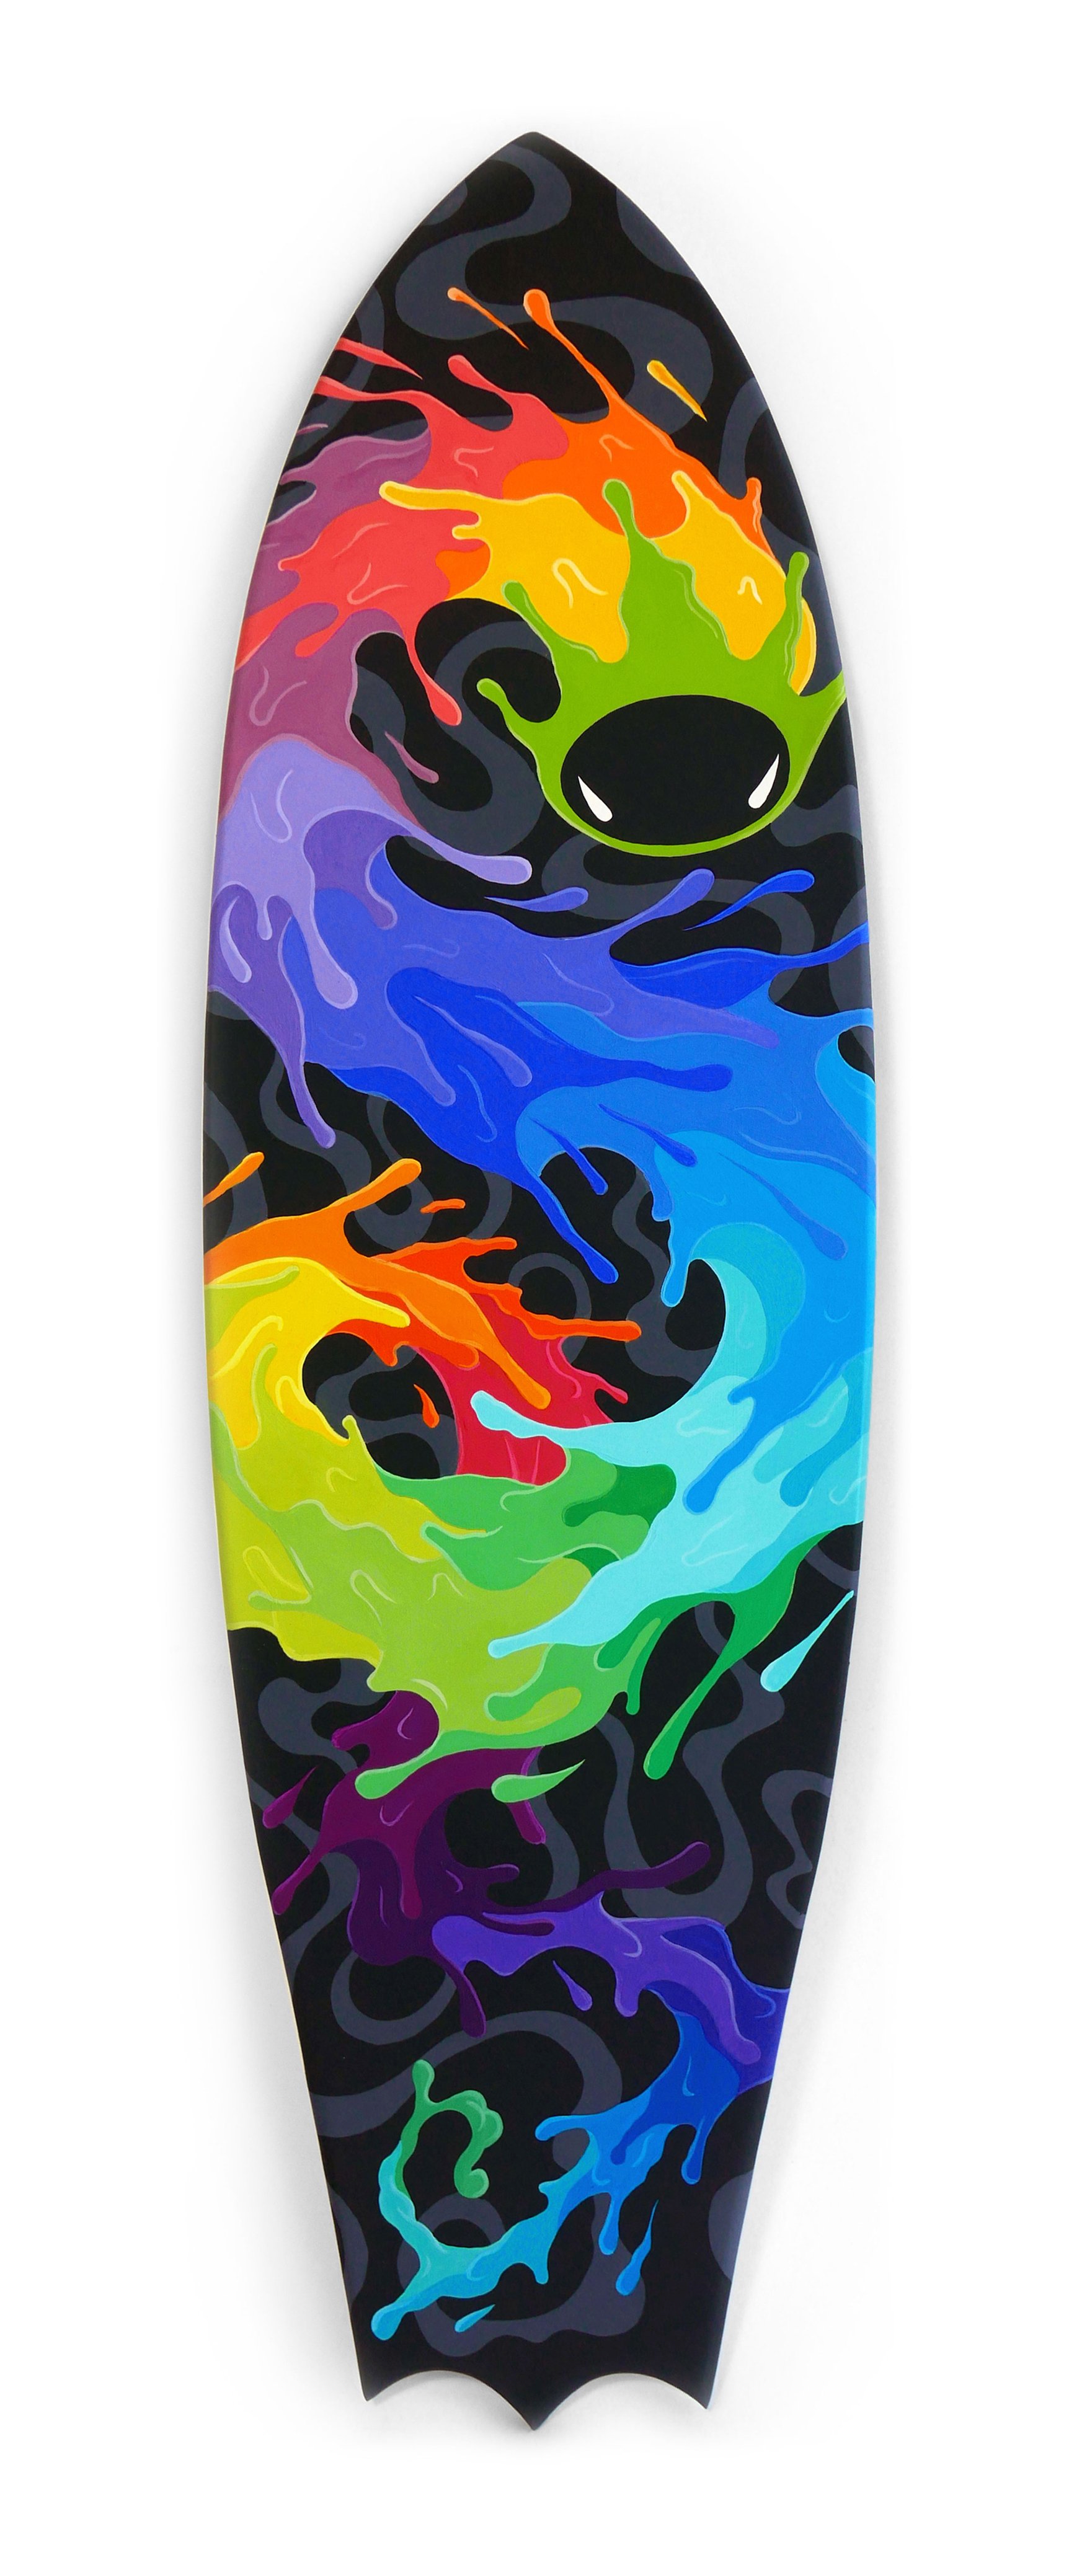 Hand painted skateboard commission